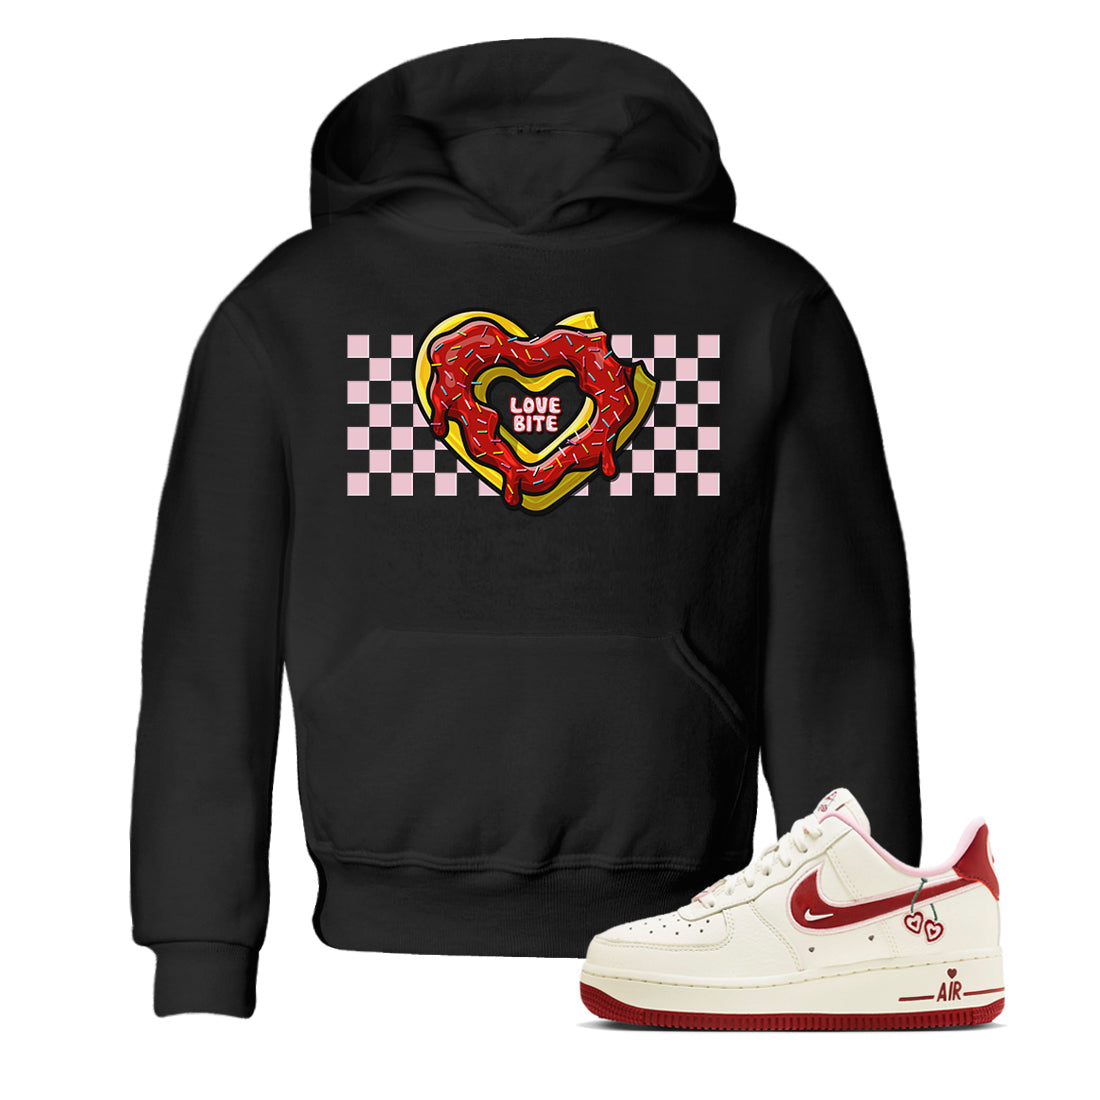 Air Force 1 Valentines Day Sneaker Match Tees Love Bite Sneaker Tees Air Force 1 Valentines Day Sneaker Release Tees Kids Shirts